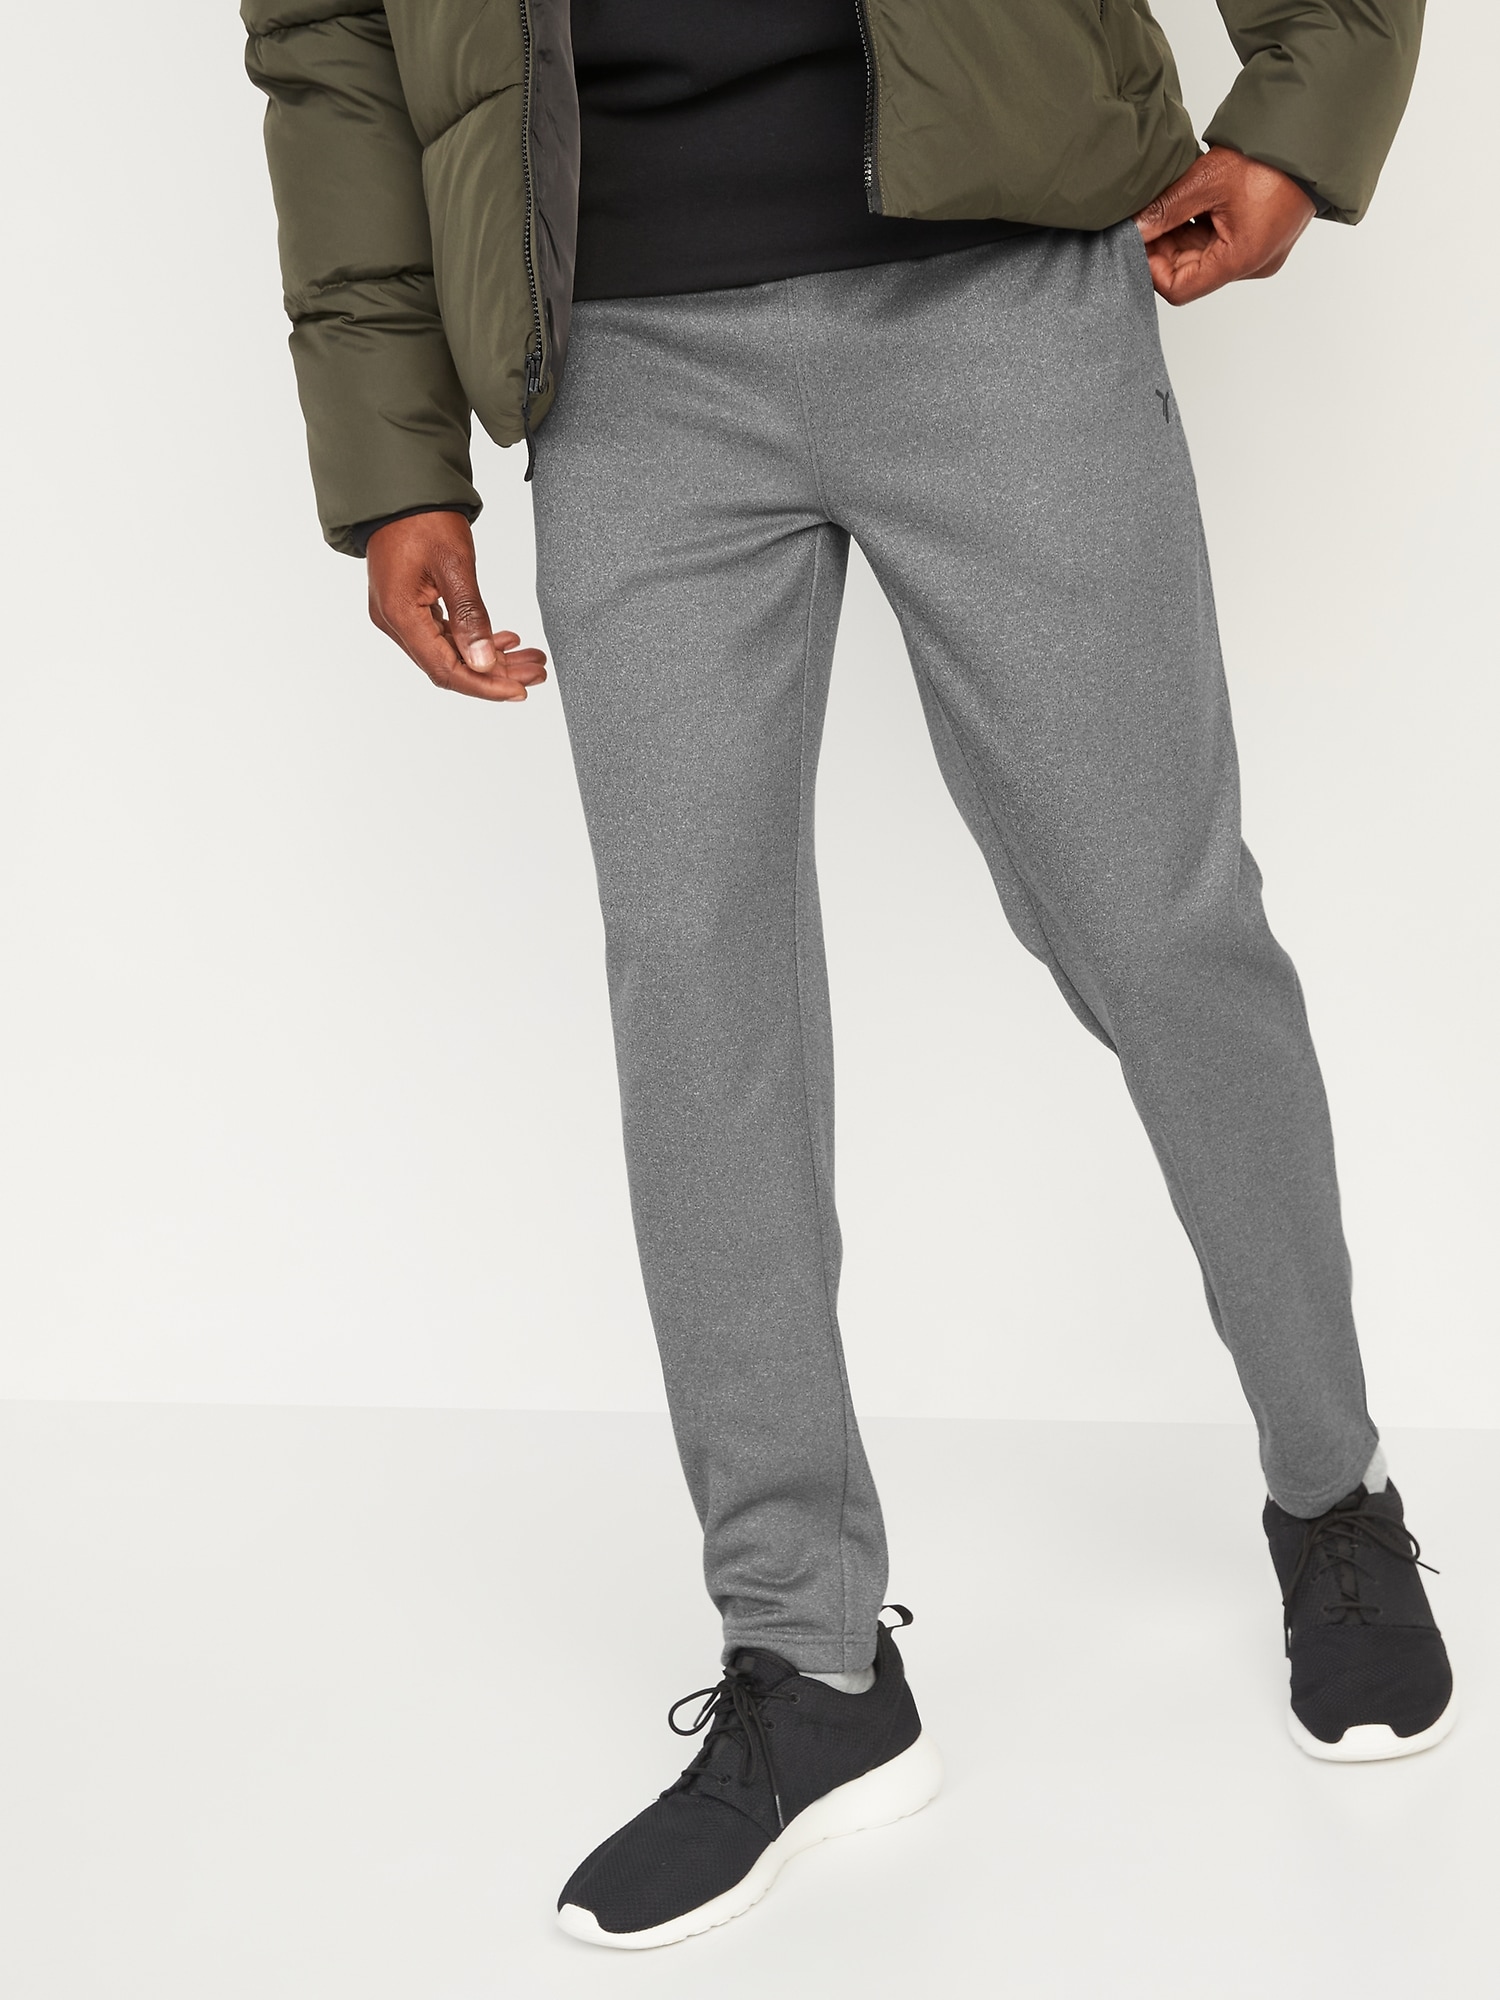 Soft-Brushed Go-Dry Tapered Performance Sweatpants